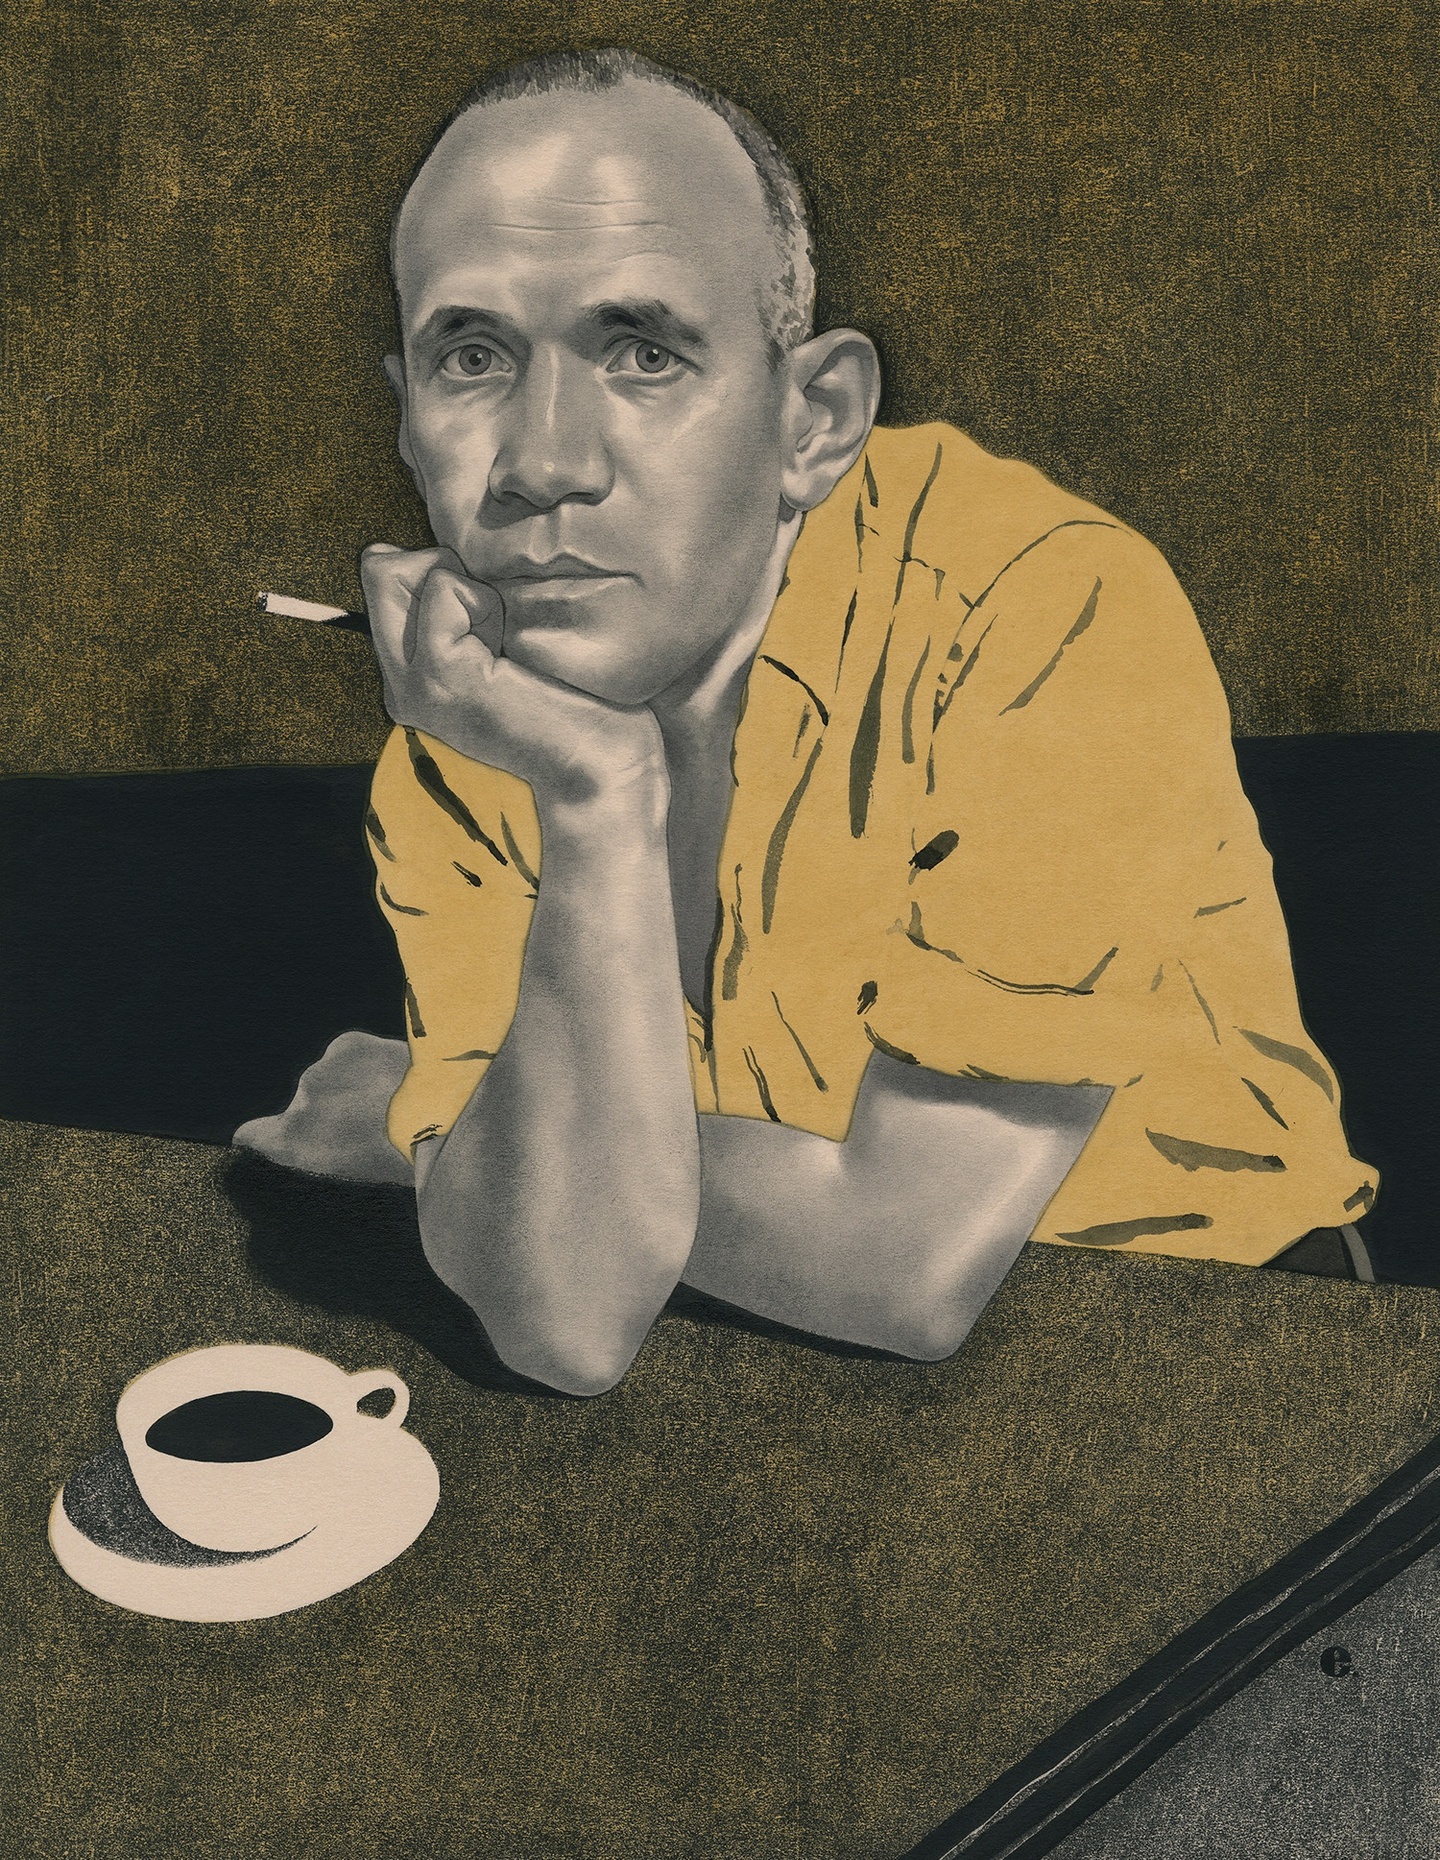 A person wearing a rolled up shirt, cigarette in hand, gazing at the viewer at a table, a cup of coffee placed before them.